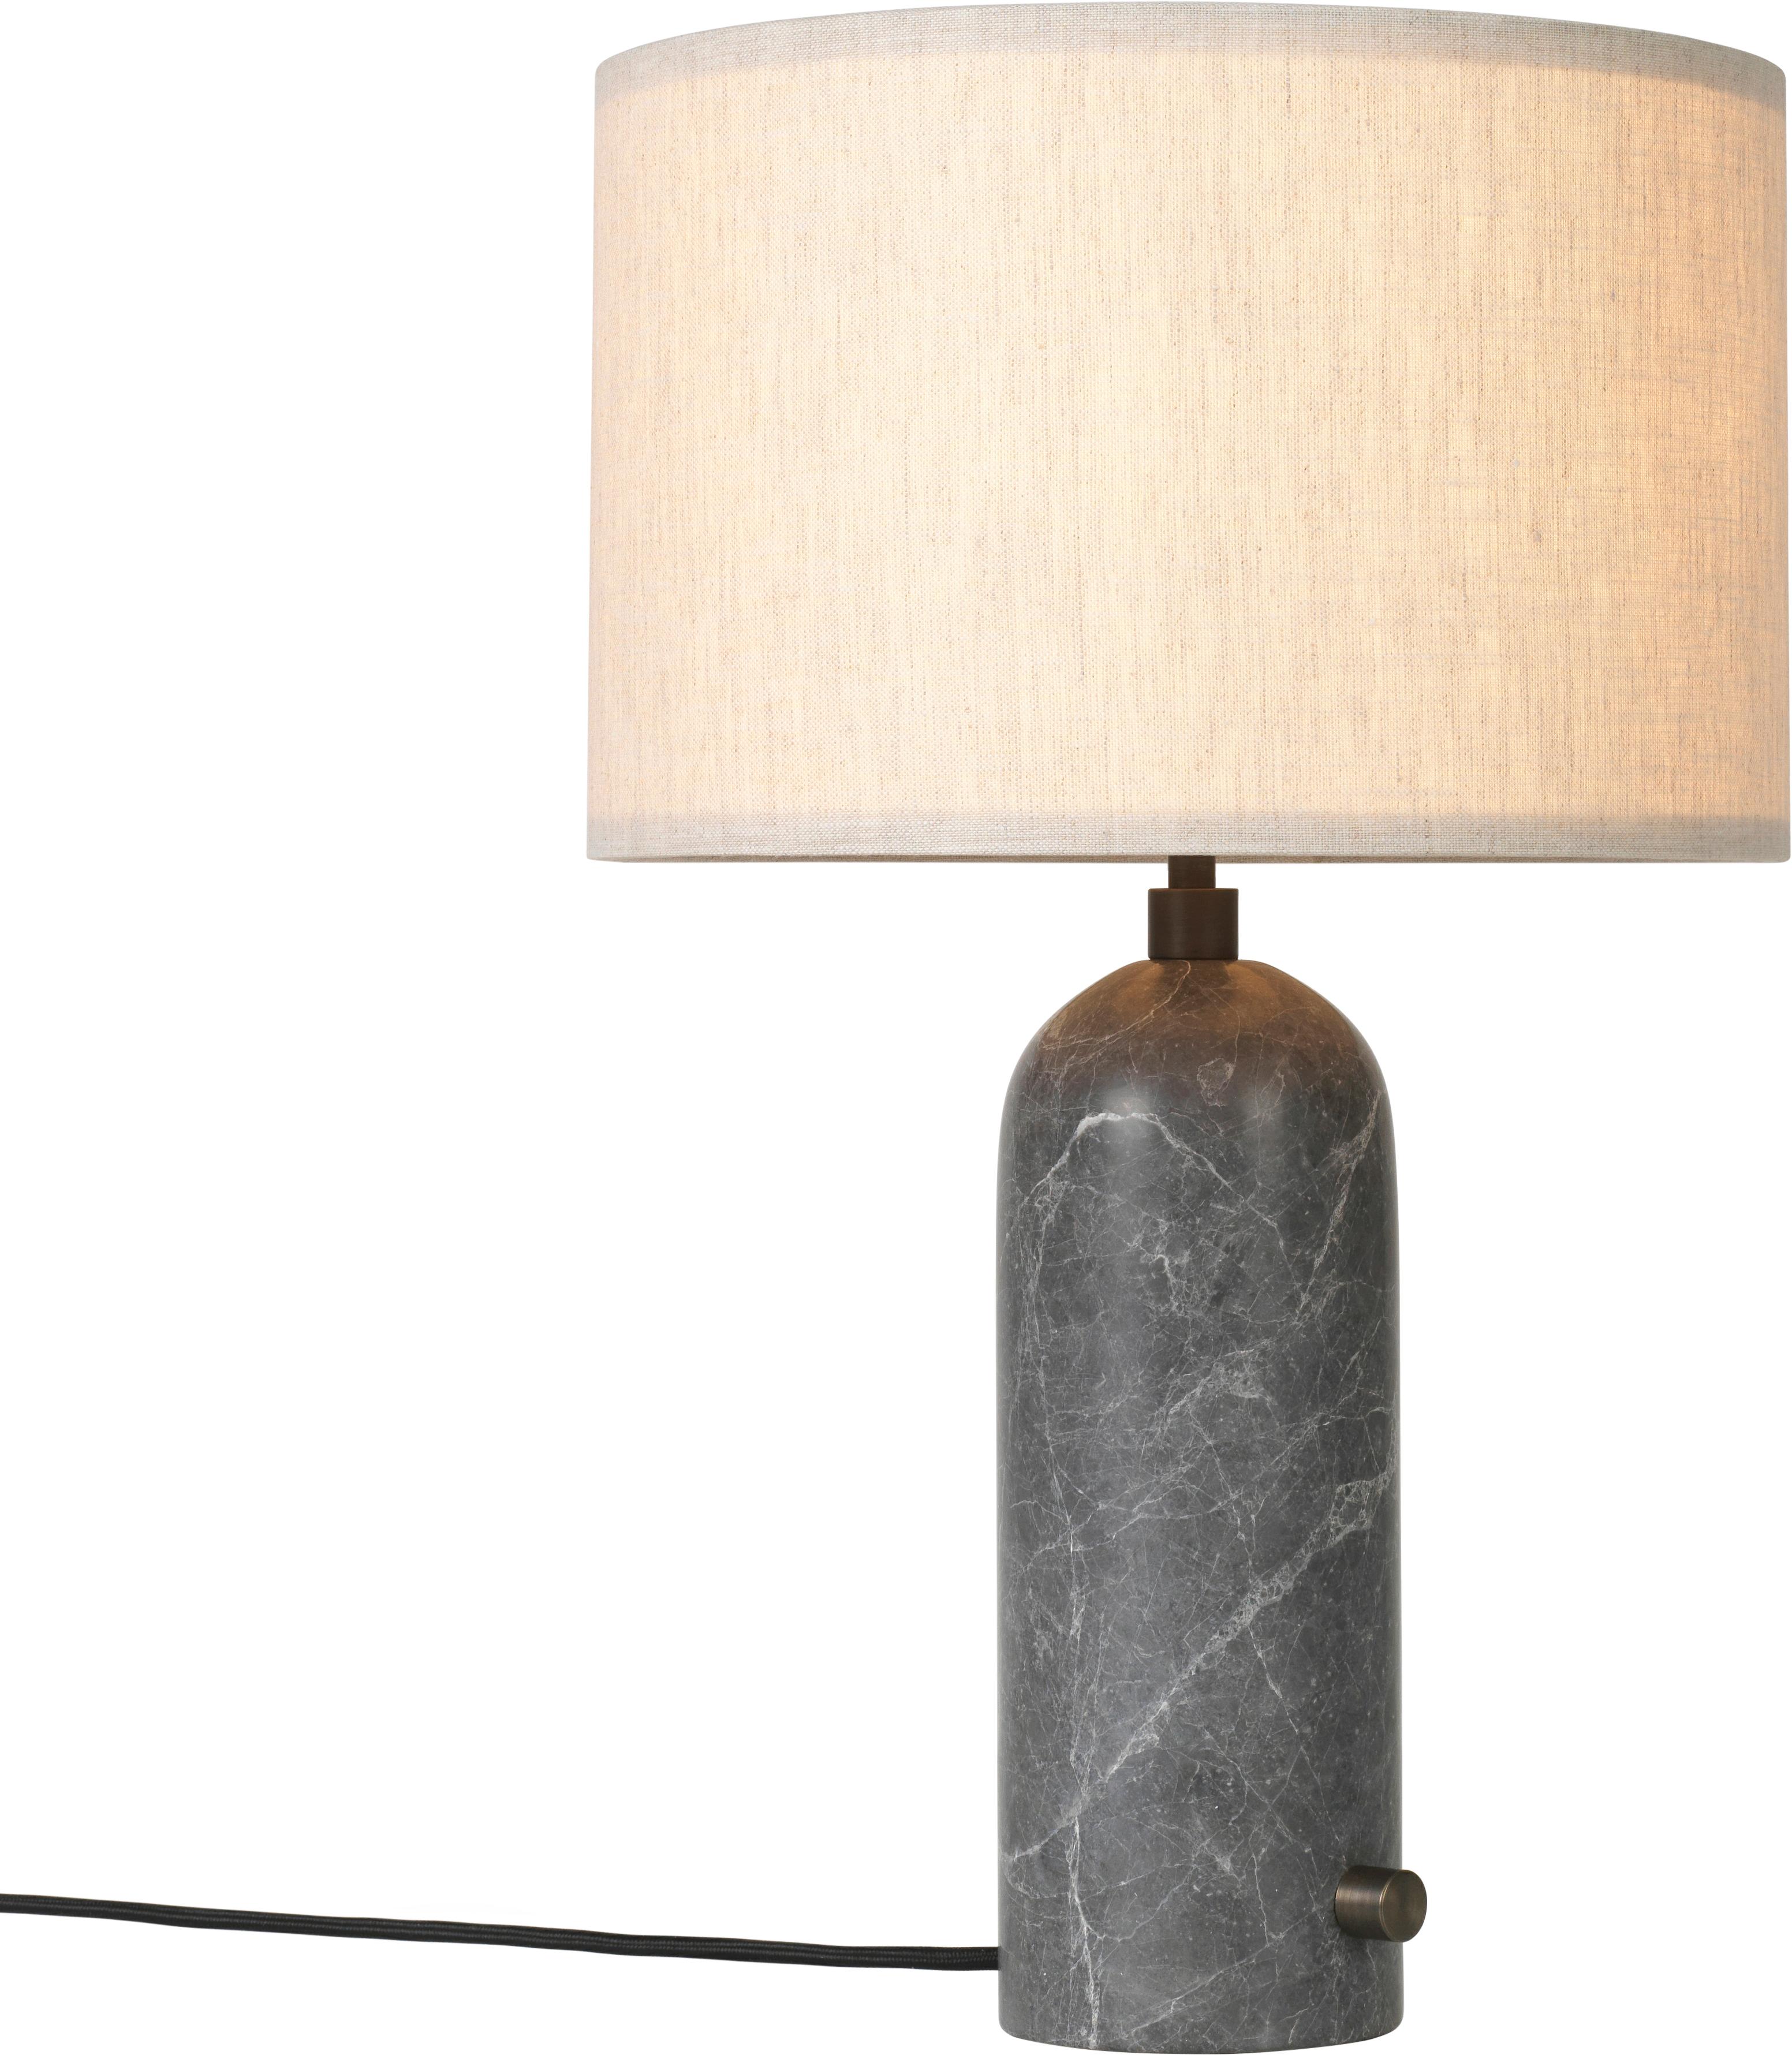 Large 'Gravity' Marble Table Lamp by Space Copenhagen for Gubi in White For Sale 3